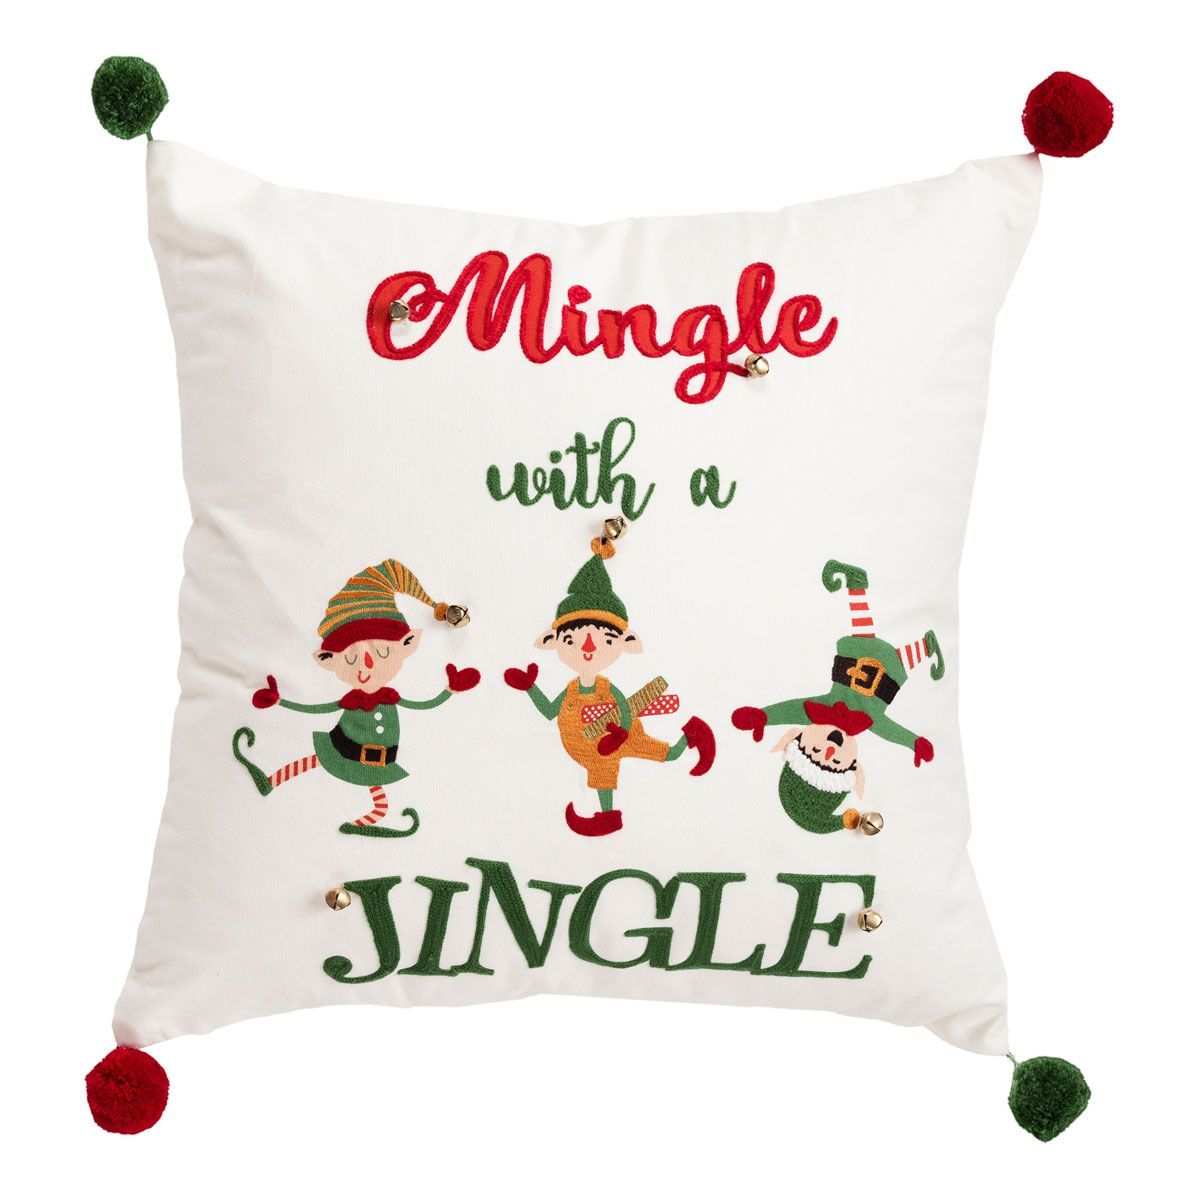 Picture of MINGLE WITH A JINGLE THROW PILLOW